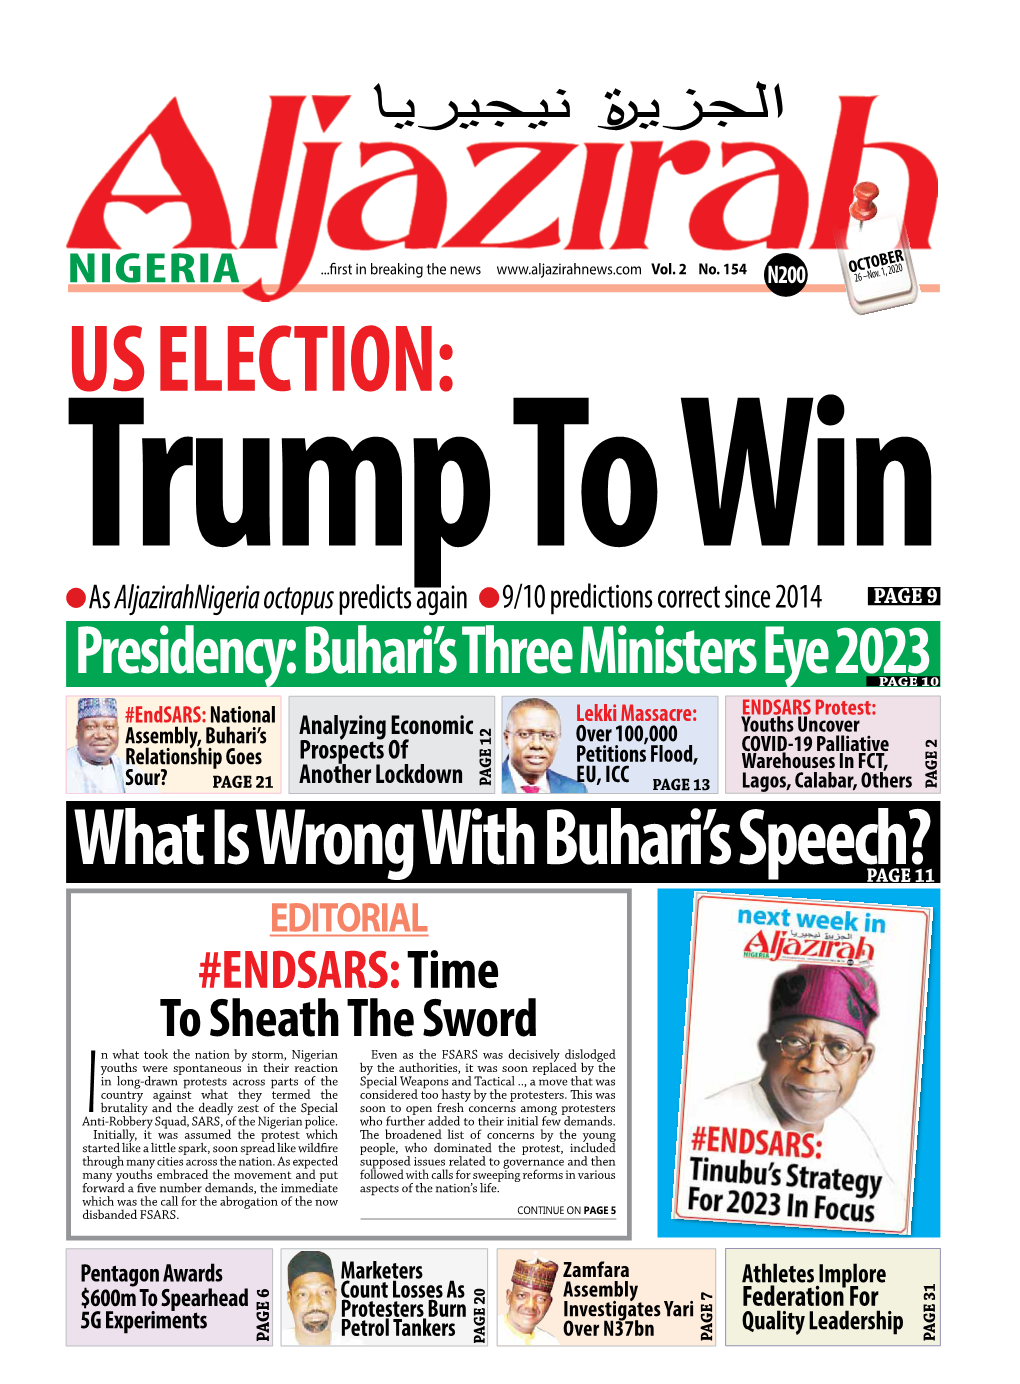 What Is Wrong with Buhari's Speech?